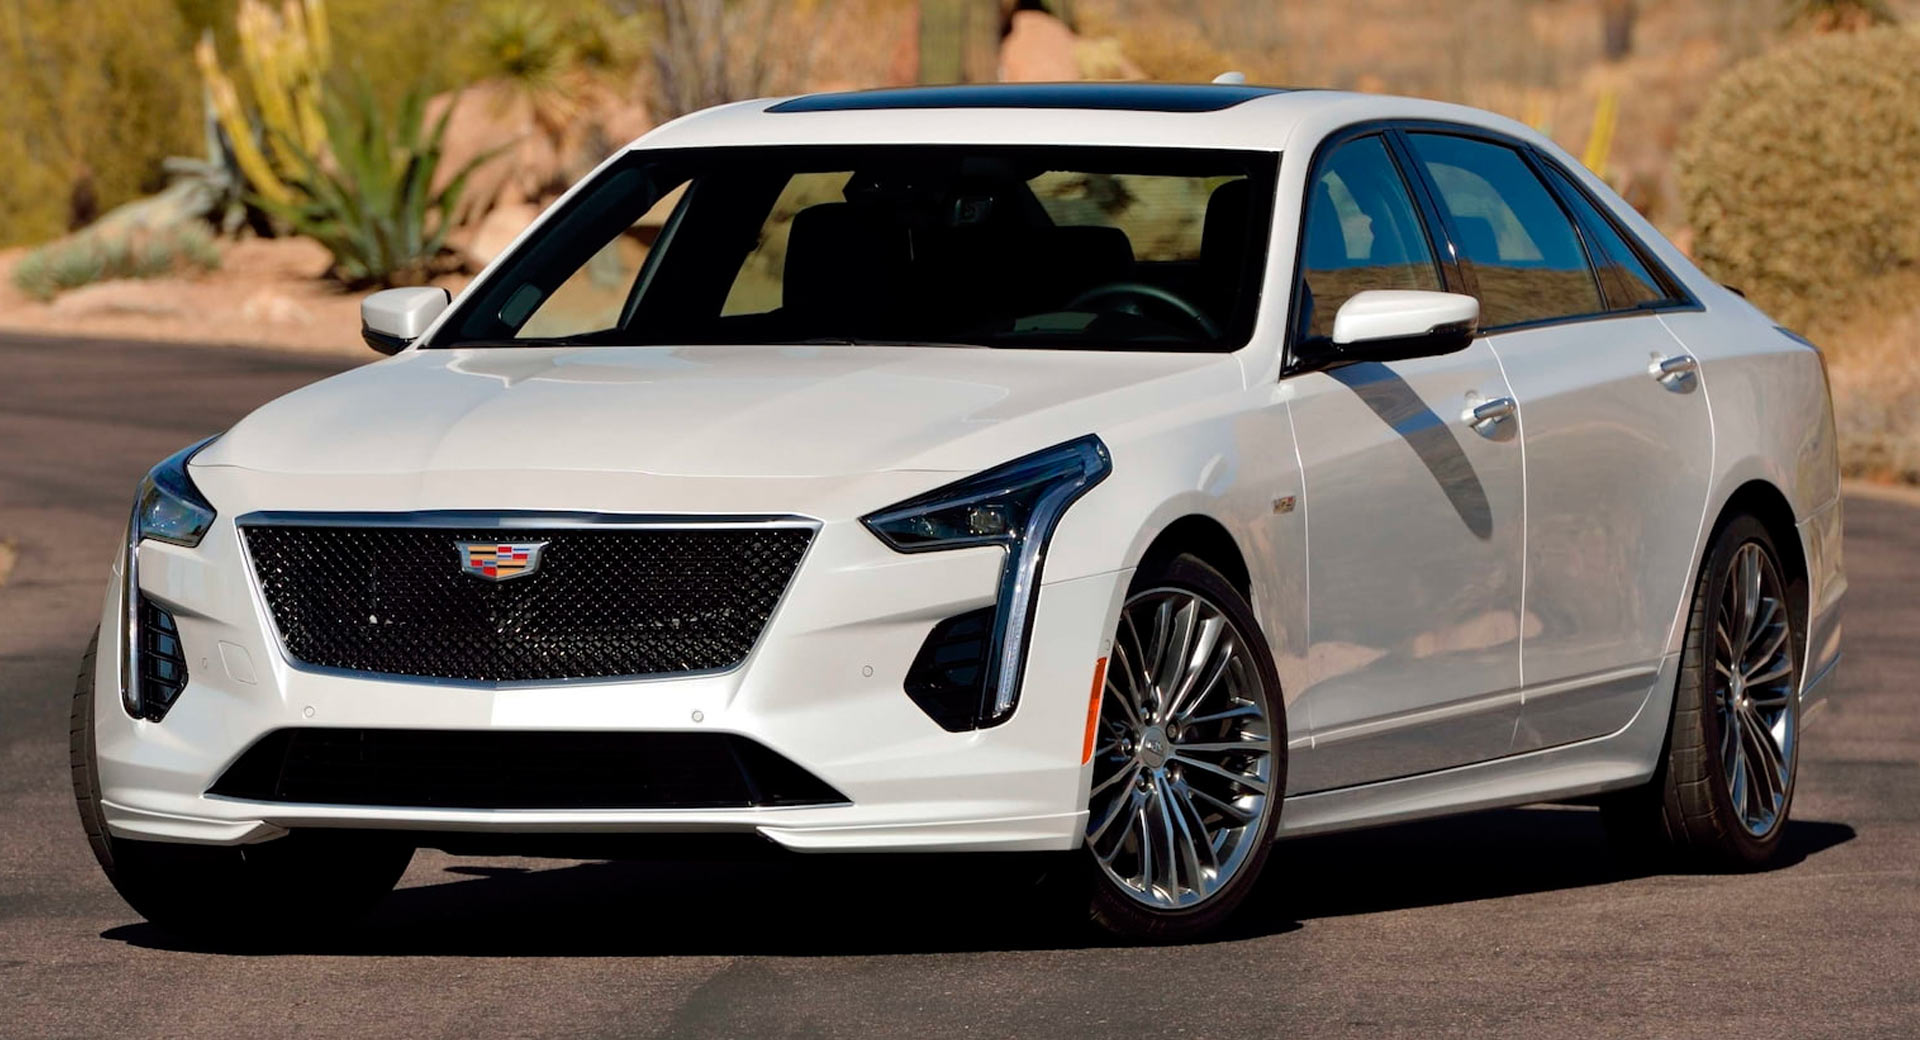 The Cadillac CT6V Is Shaping Up To Be A Future Classic, So Buy This